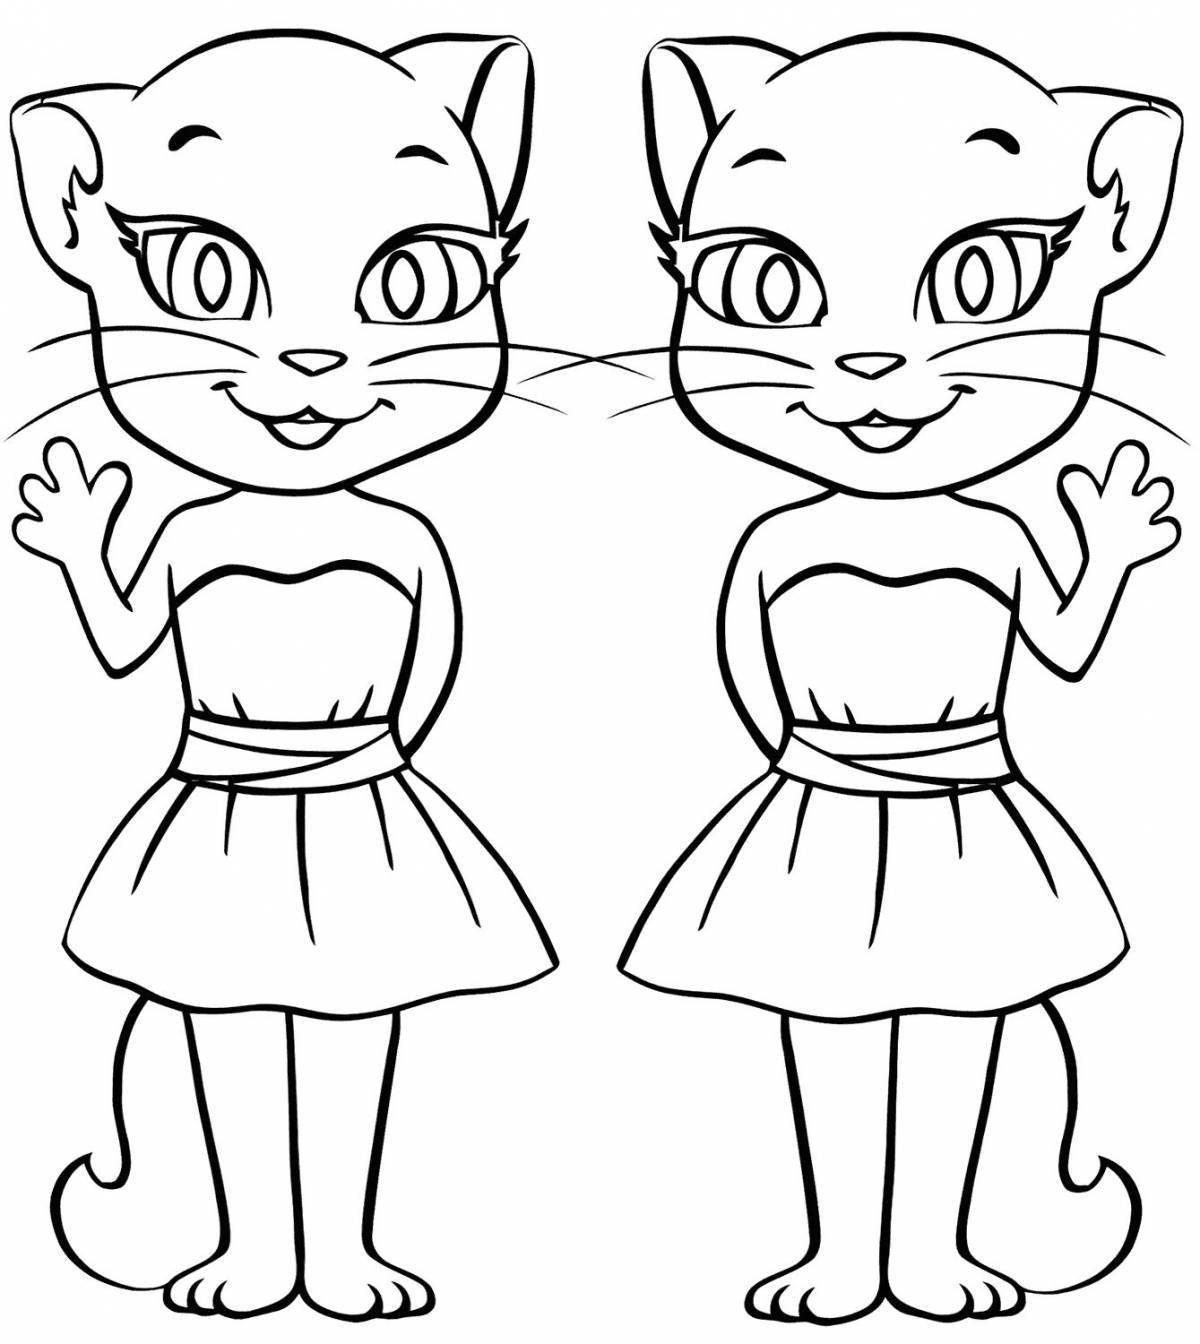 Bright cat tom and angela coloring pages